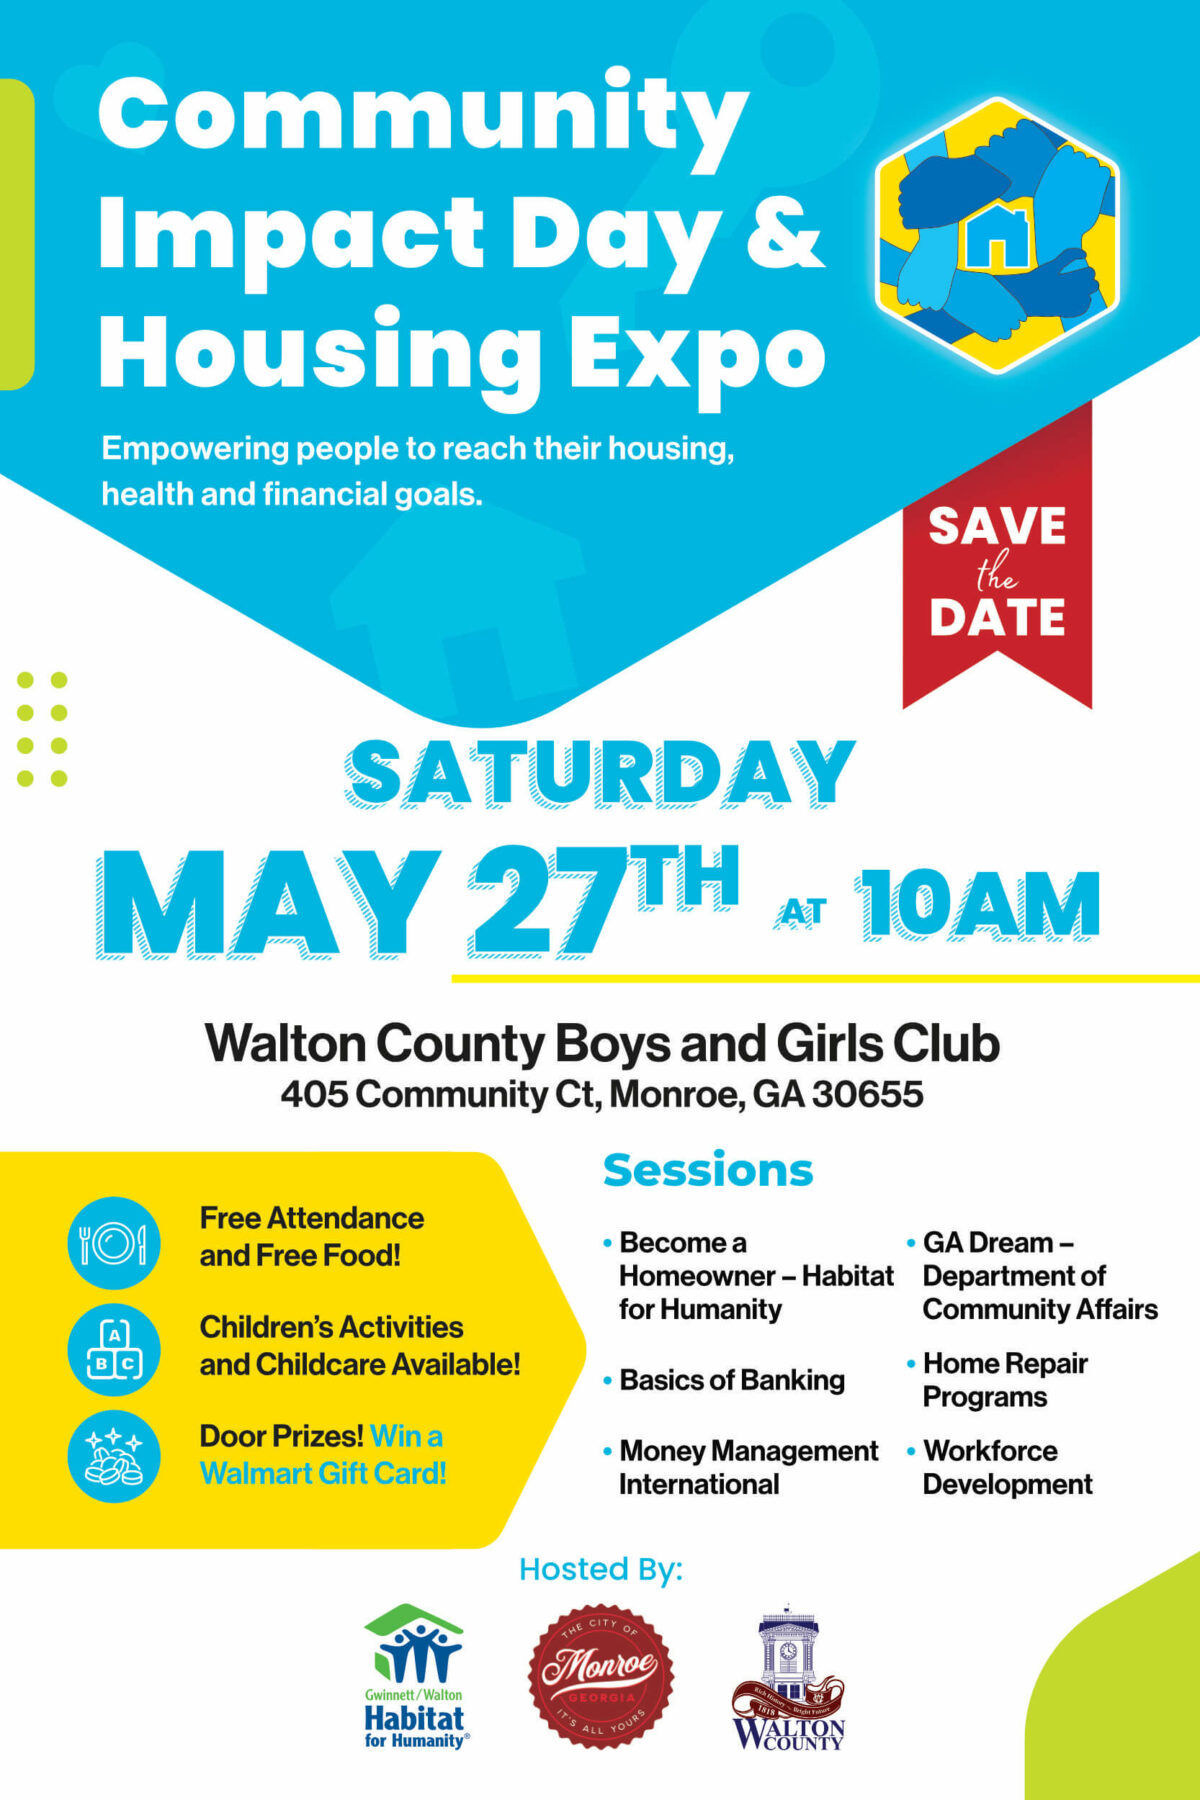 Save the Date to join us on May 27th, 2023 for the Community Impact Day at the Walton County Boys and Girls Club.